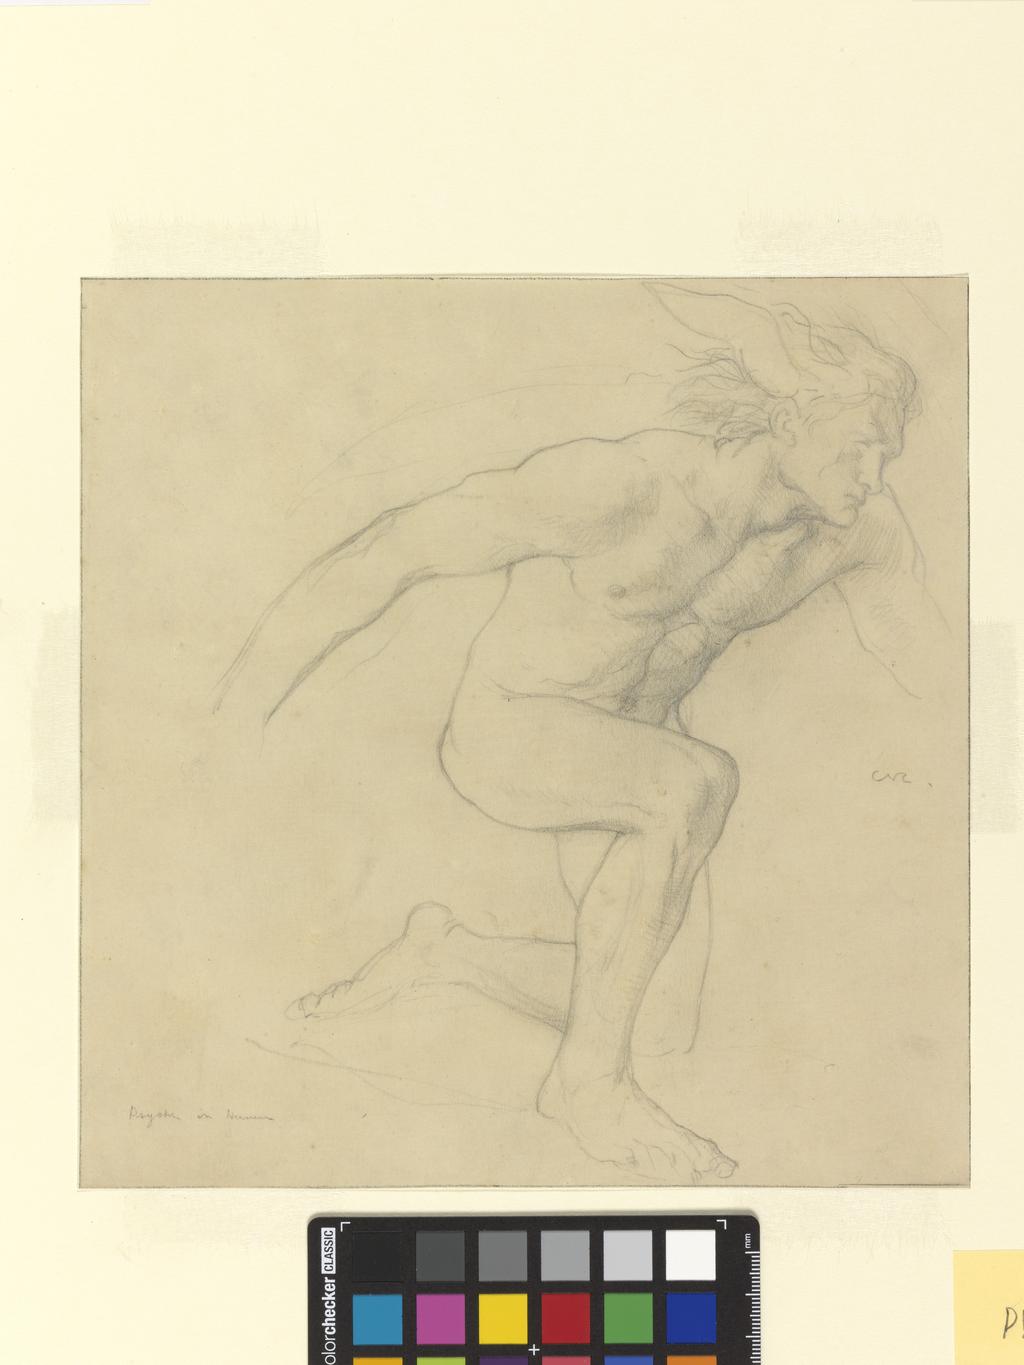 An image of Psyche. Ricketts, Charles de Sousy (British, 1866-1931). Graphite on paper, height, sheet, 218 mm, width, sheet, 213 mm. Sir Ivor and Lady Batchelor Bequest.